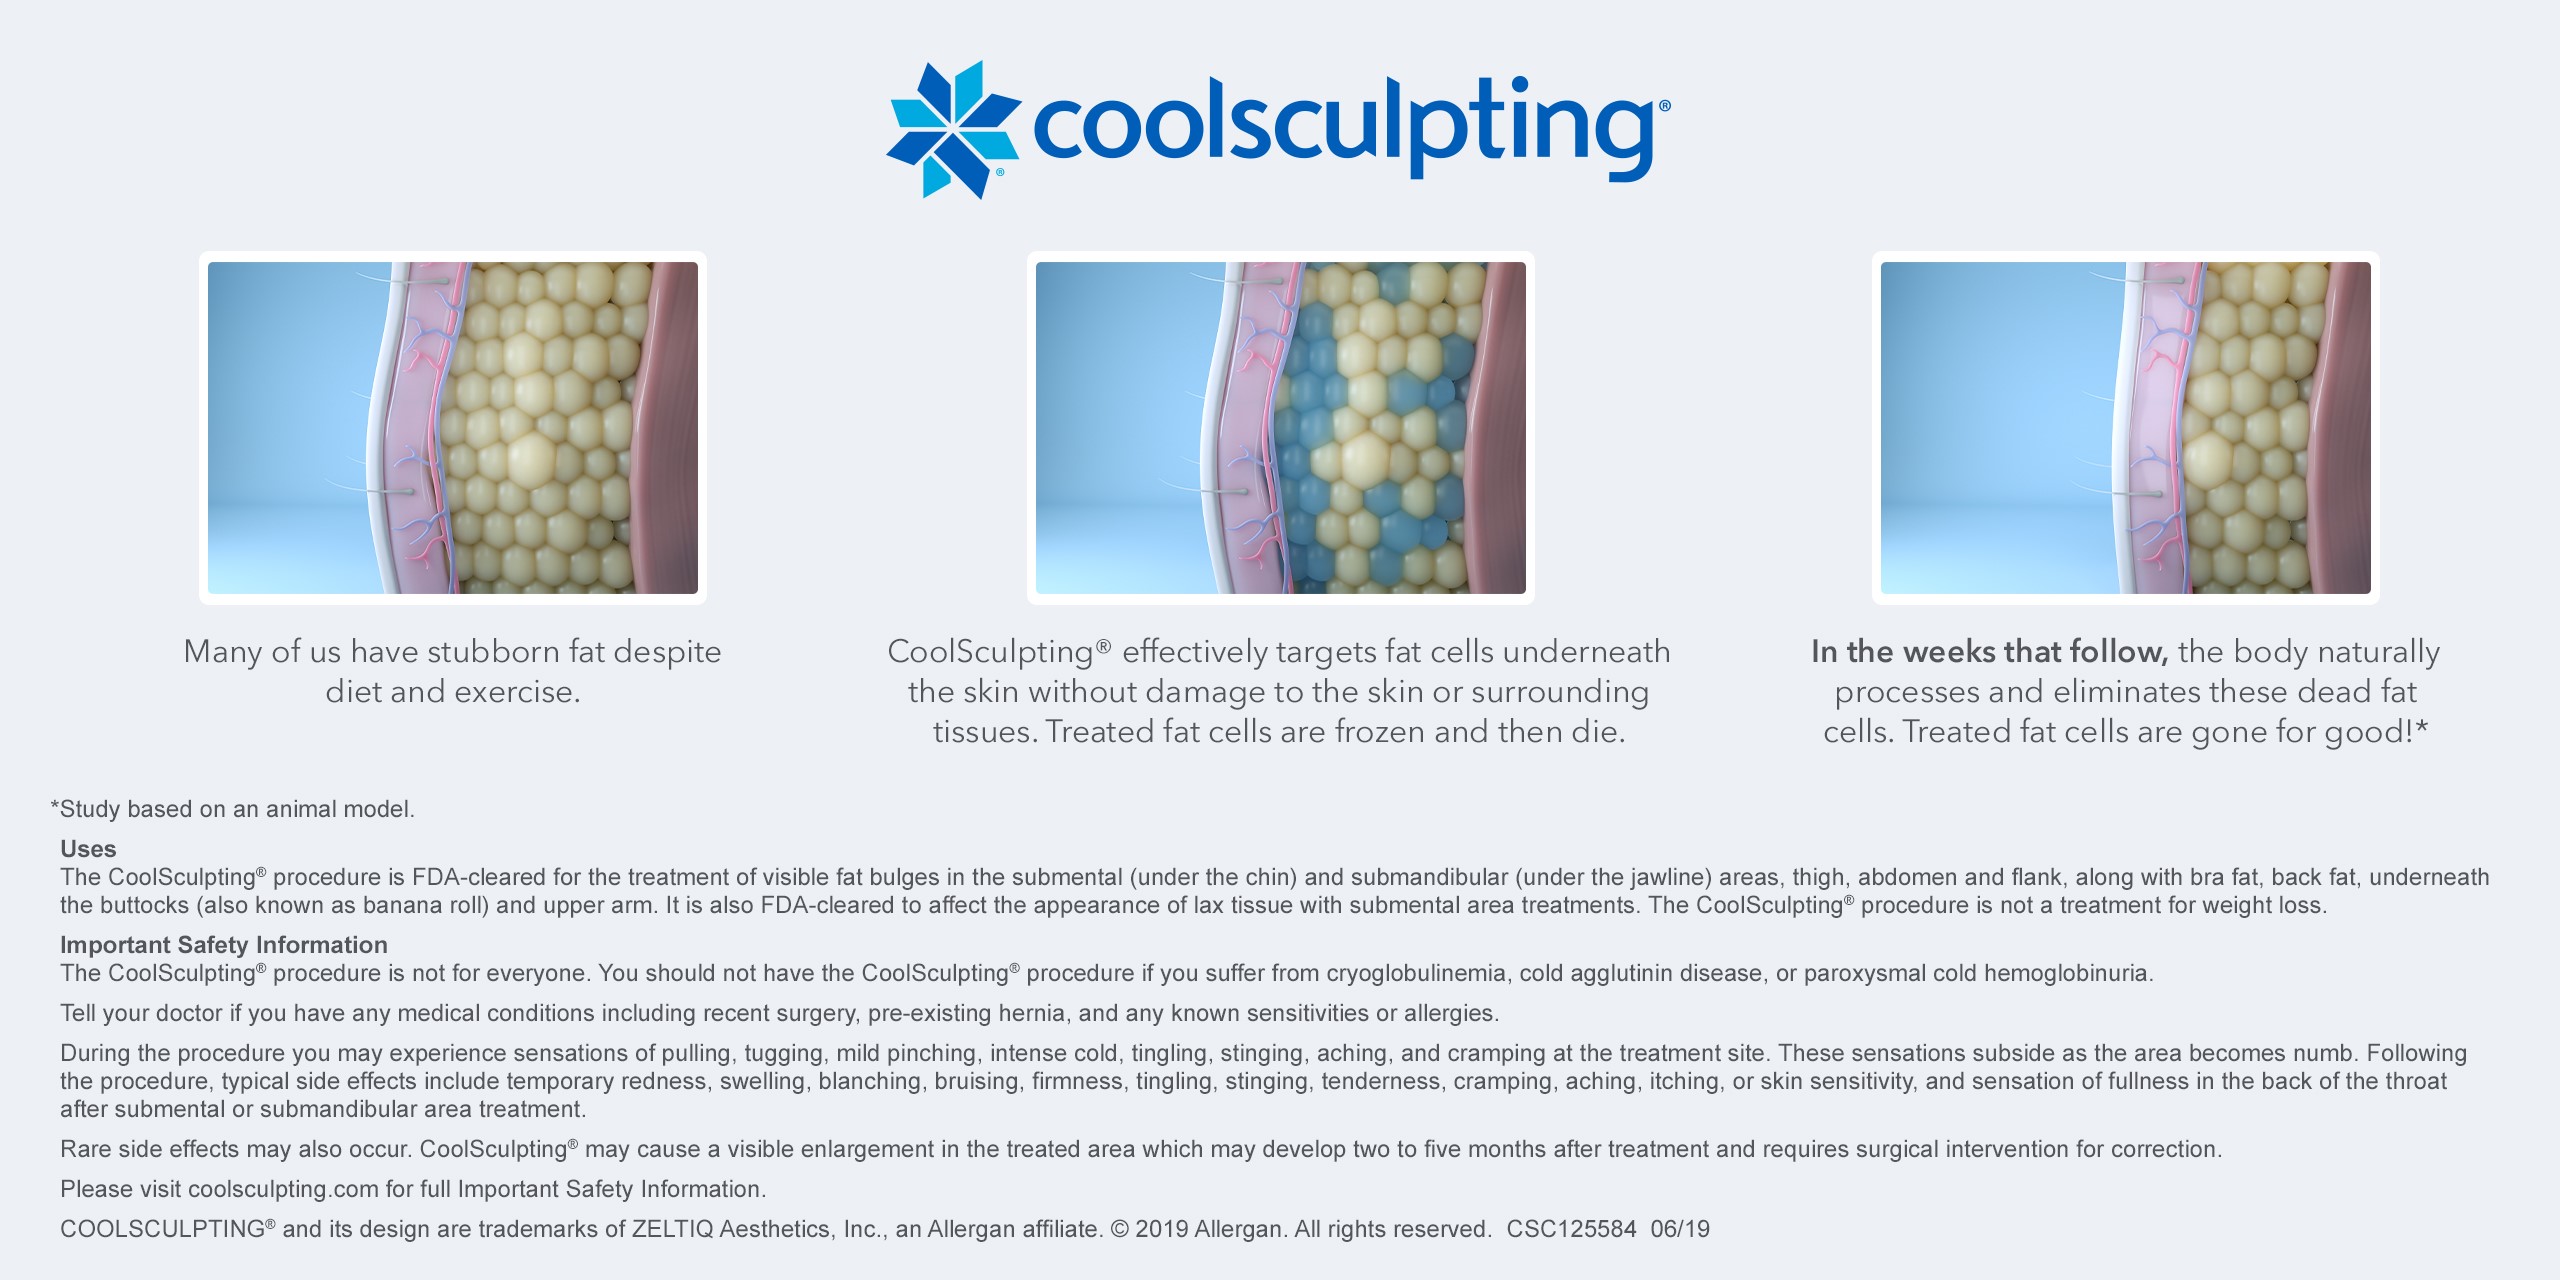 how coolsculpting works infographic